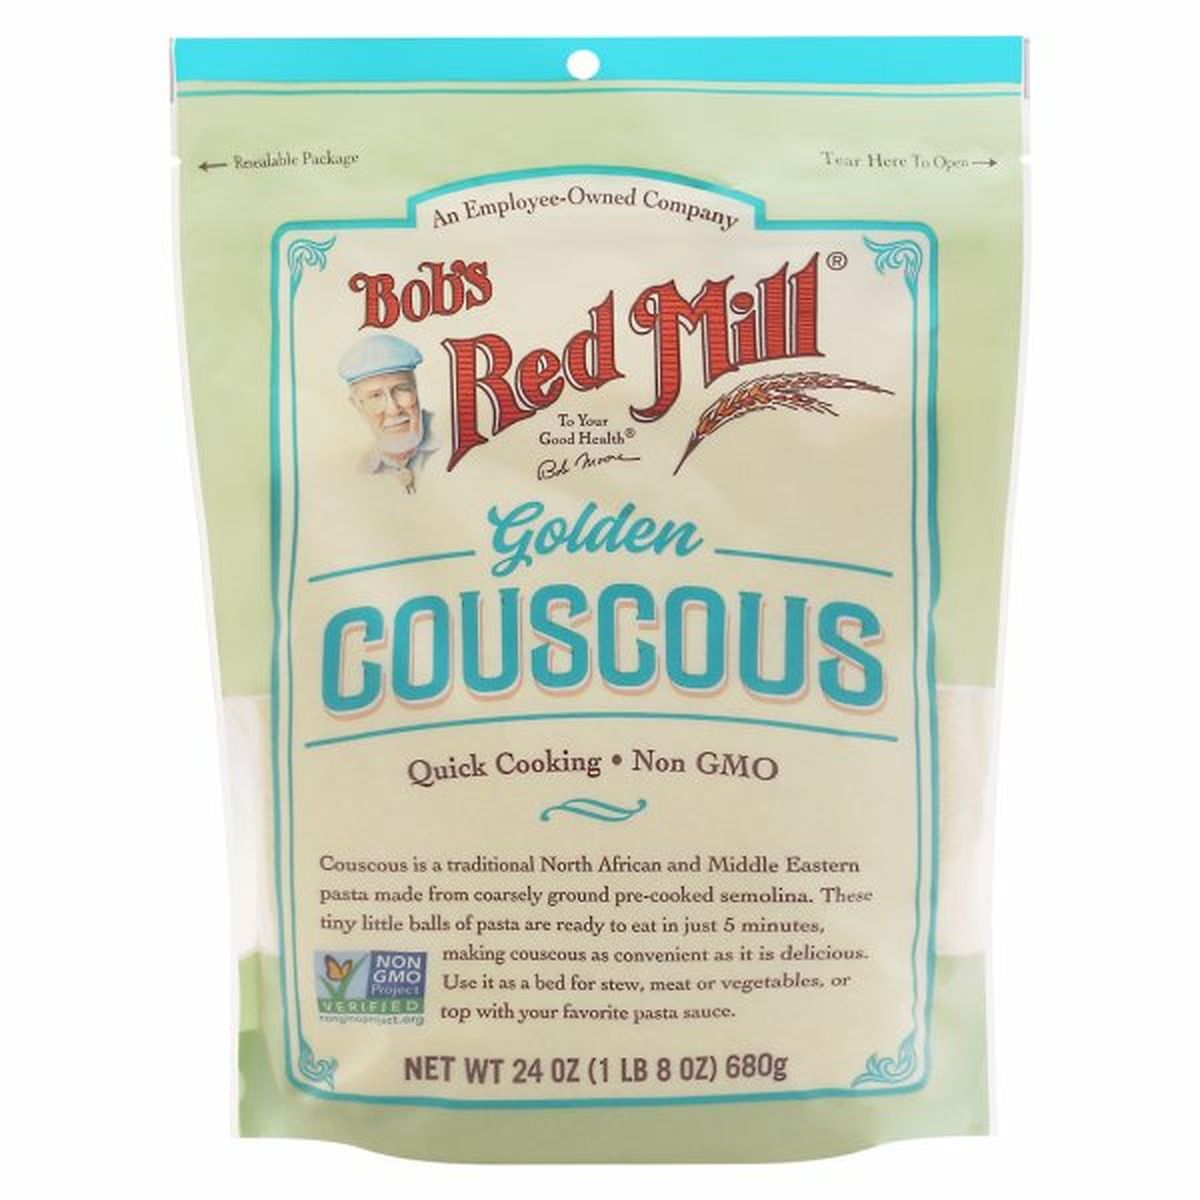 Calories in Bob's Red Mill Couscous, Golden